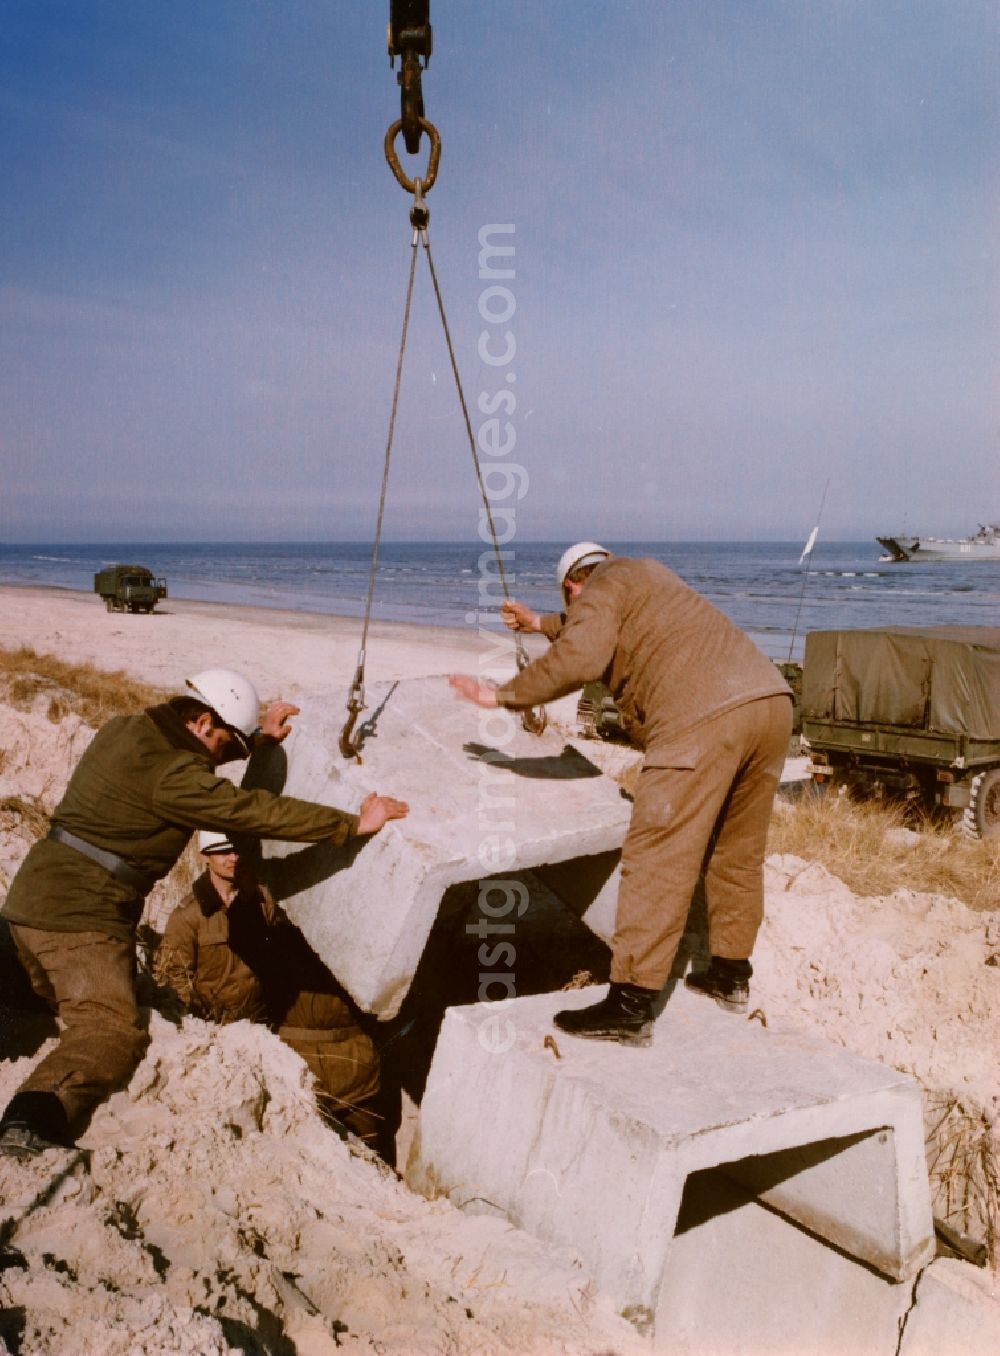 GDR picture archive: Karlshagen - Assembly and installation work of concrete segments by building pioneer soldiers of the NVA of the GDR at the dunes area of ??the beach of the Baltic Sea near Karlshagen in present-day Mecklenburg-Vorpommern